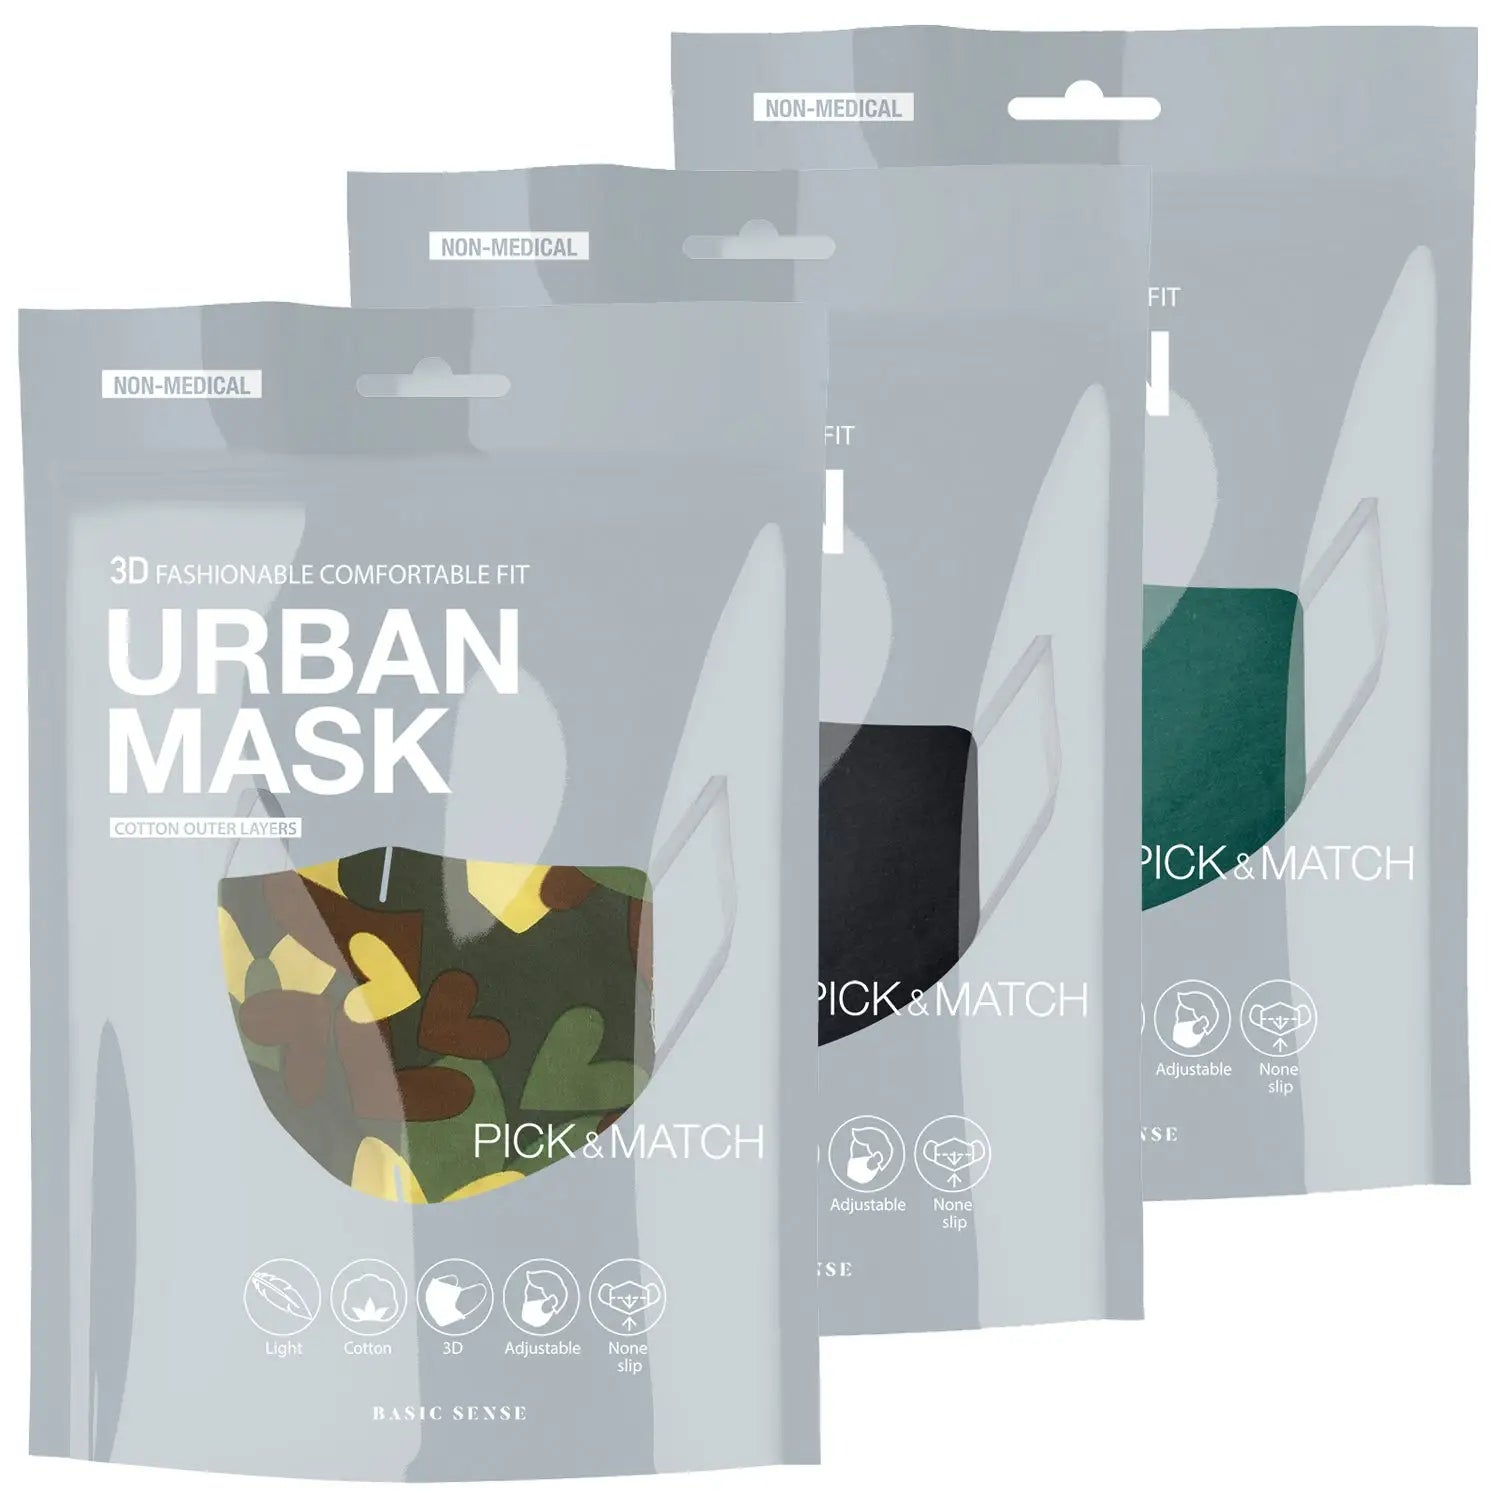 3 pack of urban mask patches displayed in 3D Design 100% Cotton Fashion Face Mask Covering